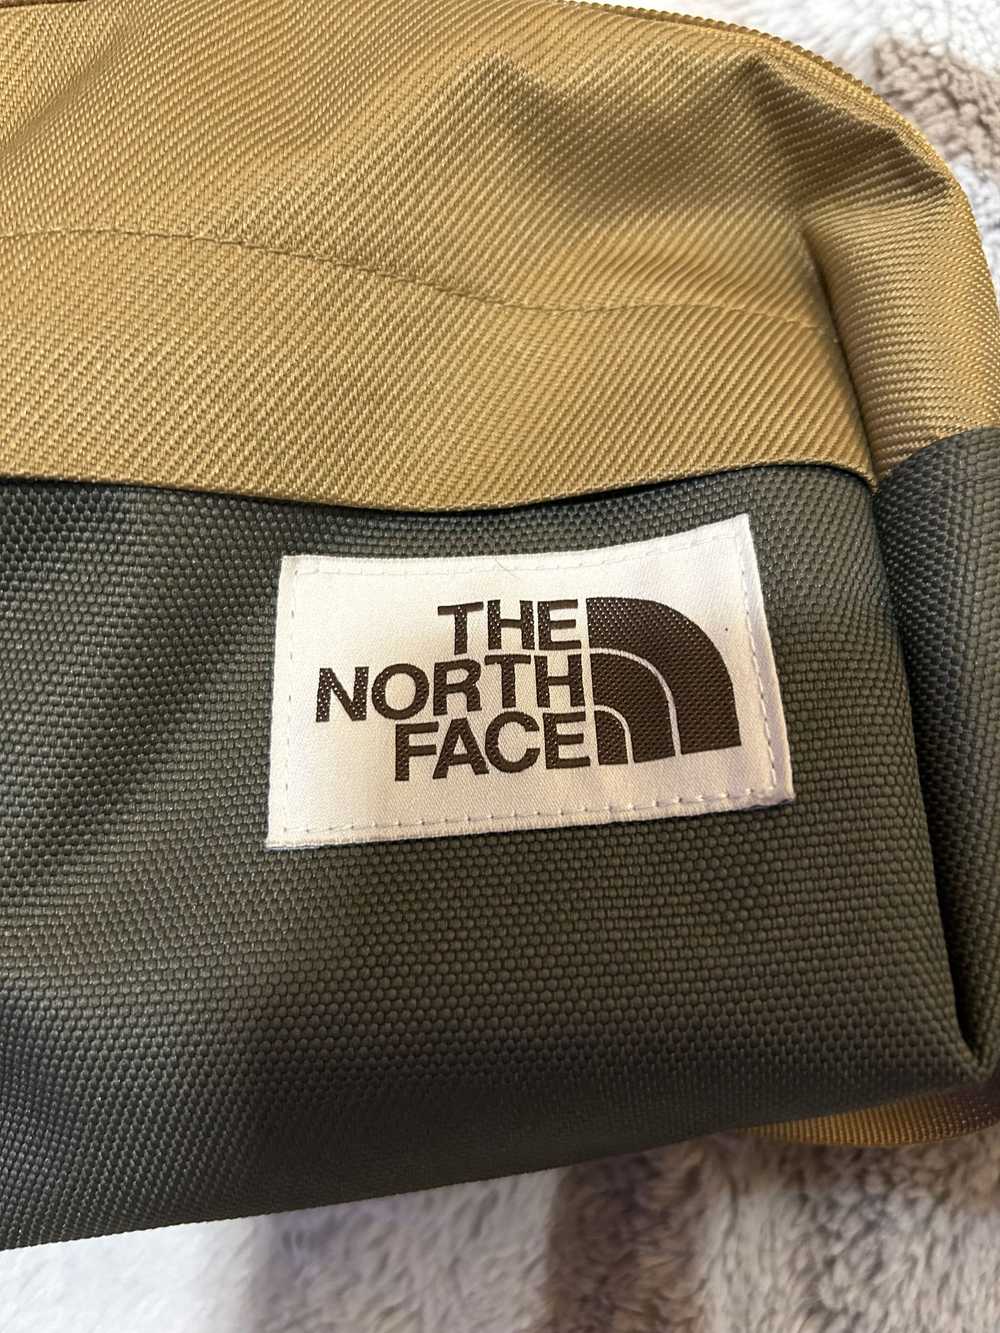 The North Face North Face Fanny Pack - image 3